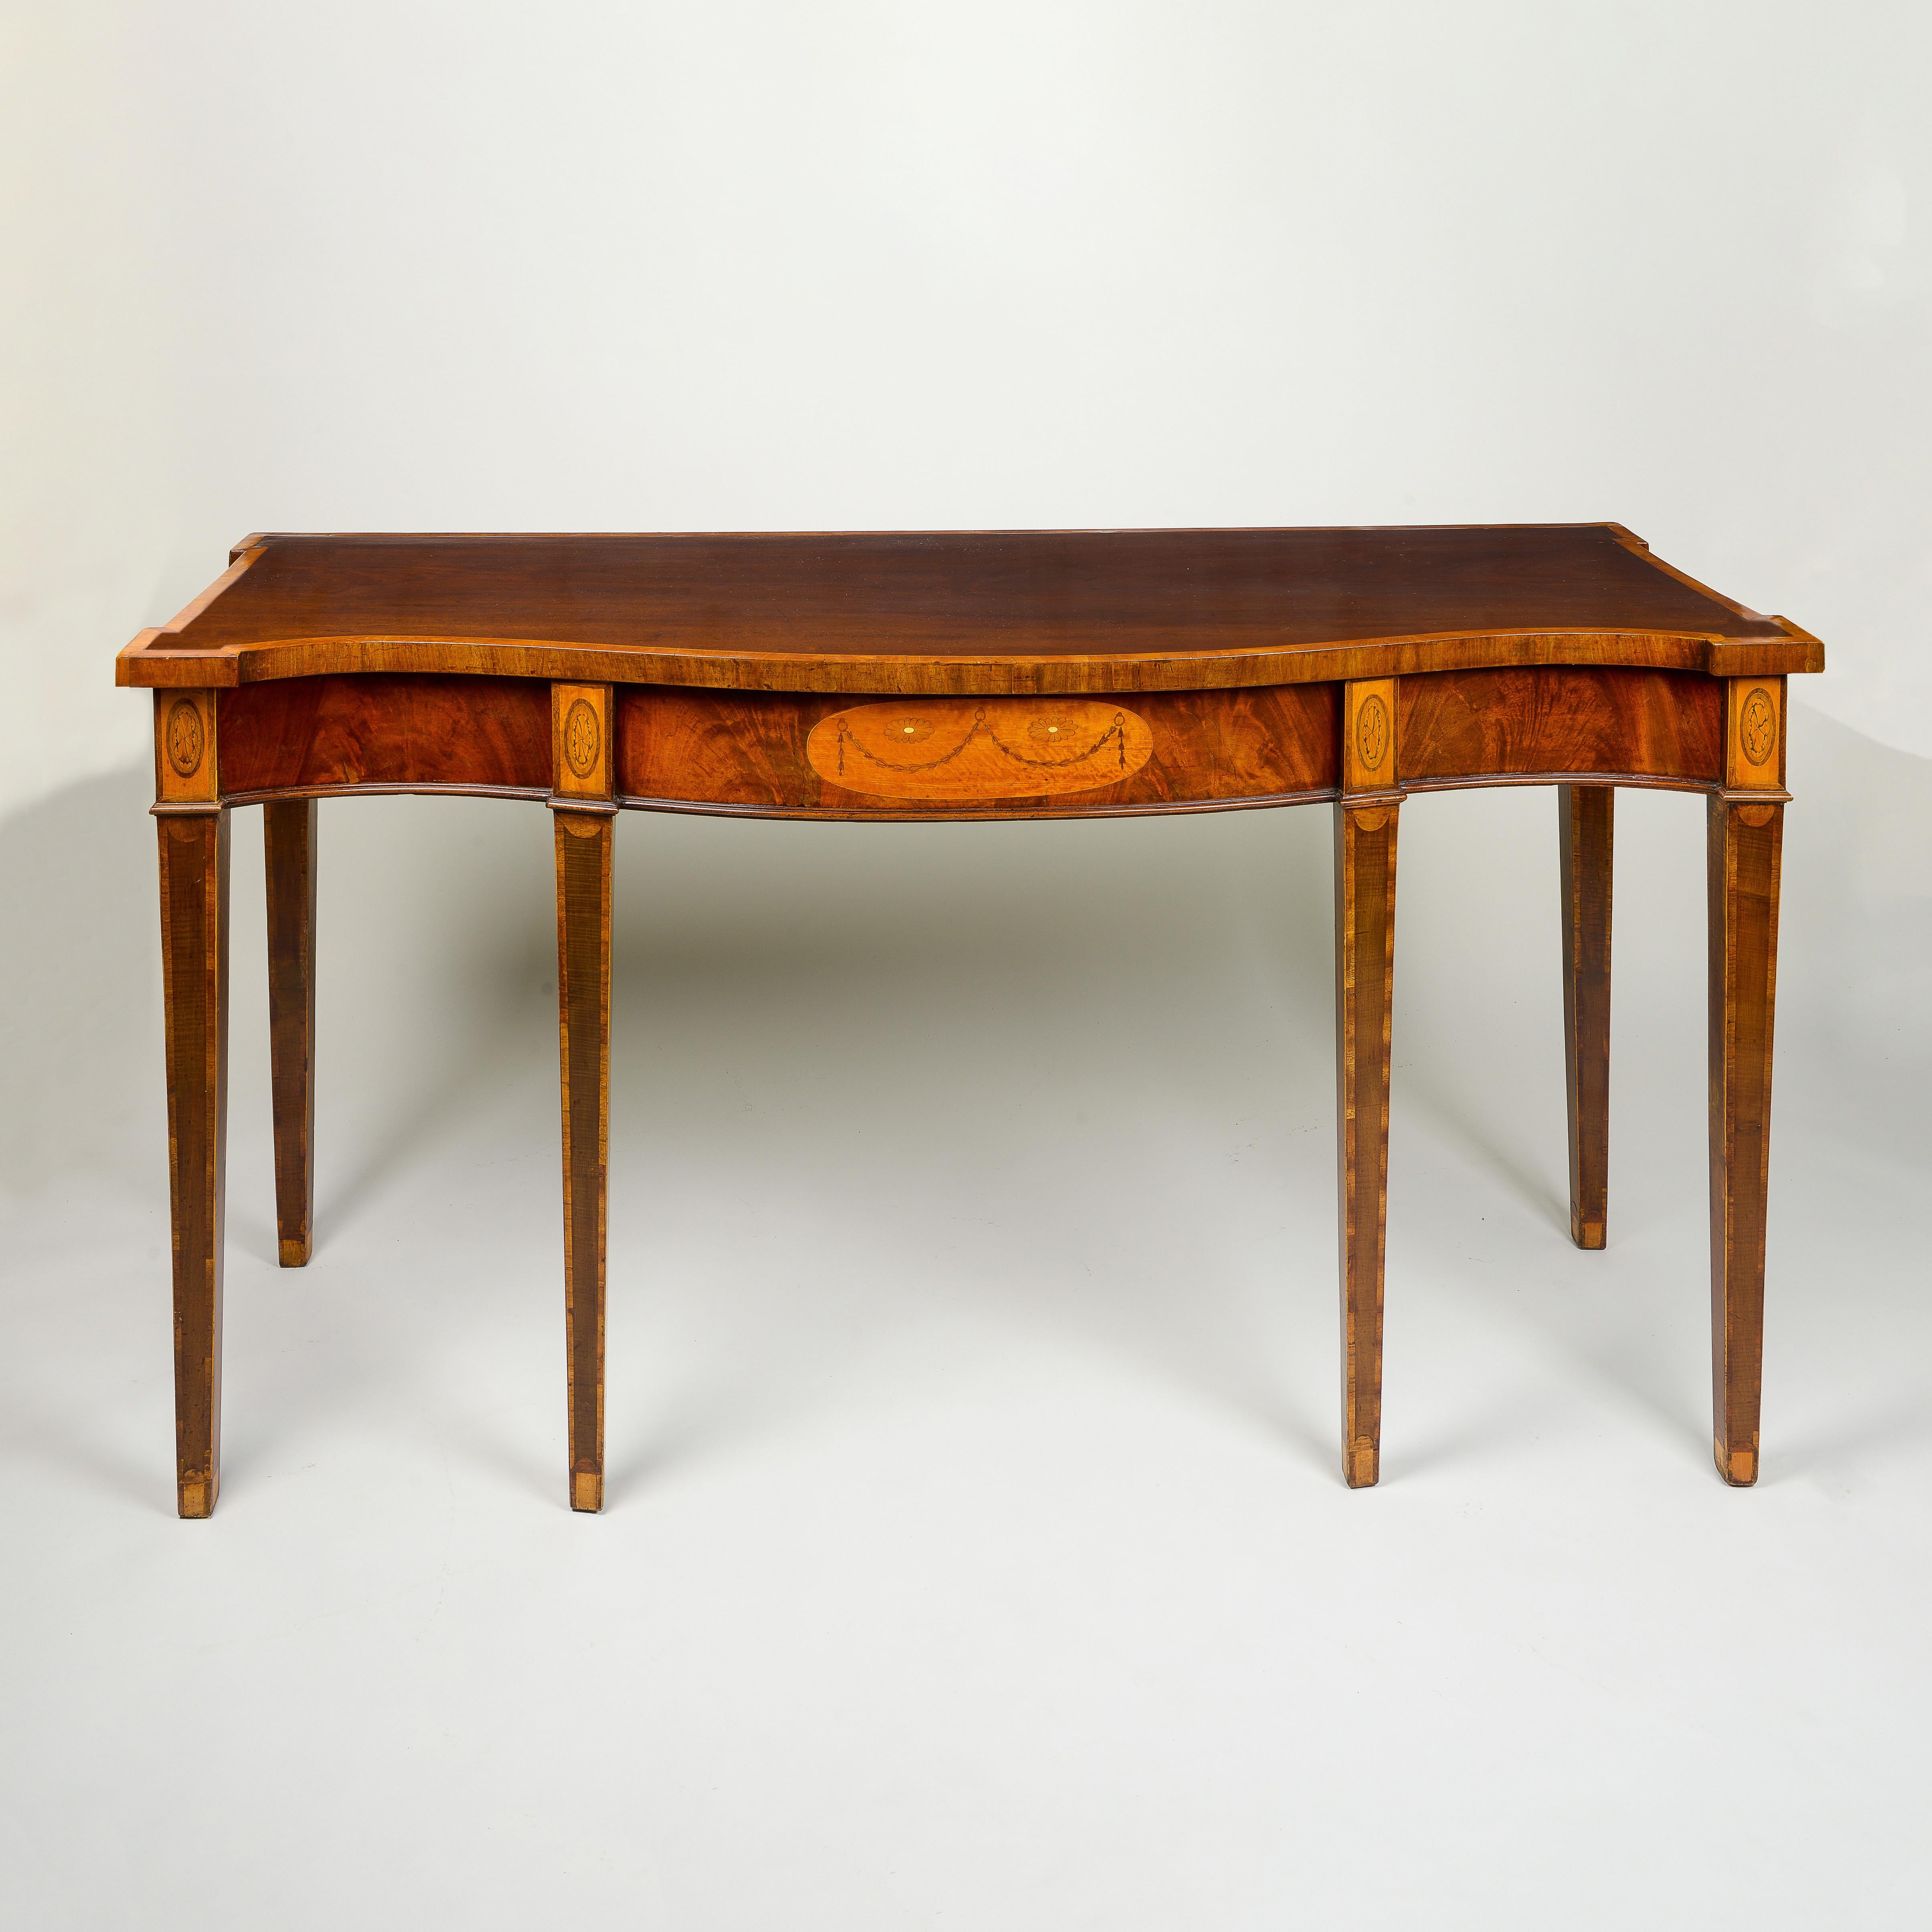 The rectangular serpentine-fronted top with outset corners and broad satinwood banding over a finely-figured frieze centered by an oval medallion inlaid with a bellflower garland on a satinwood ground; raised on four square satinwood-banded tapering